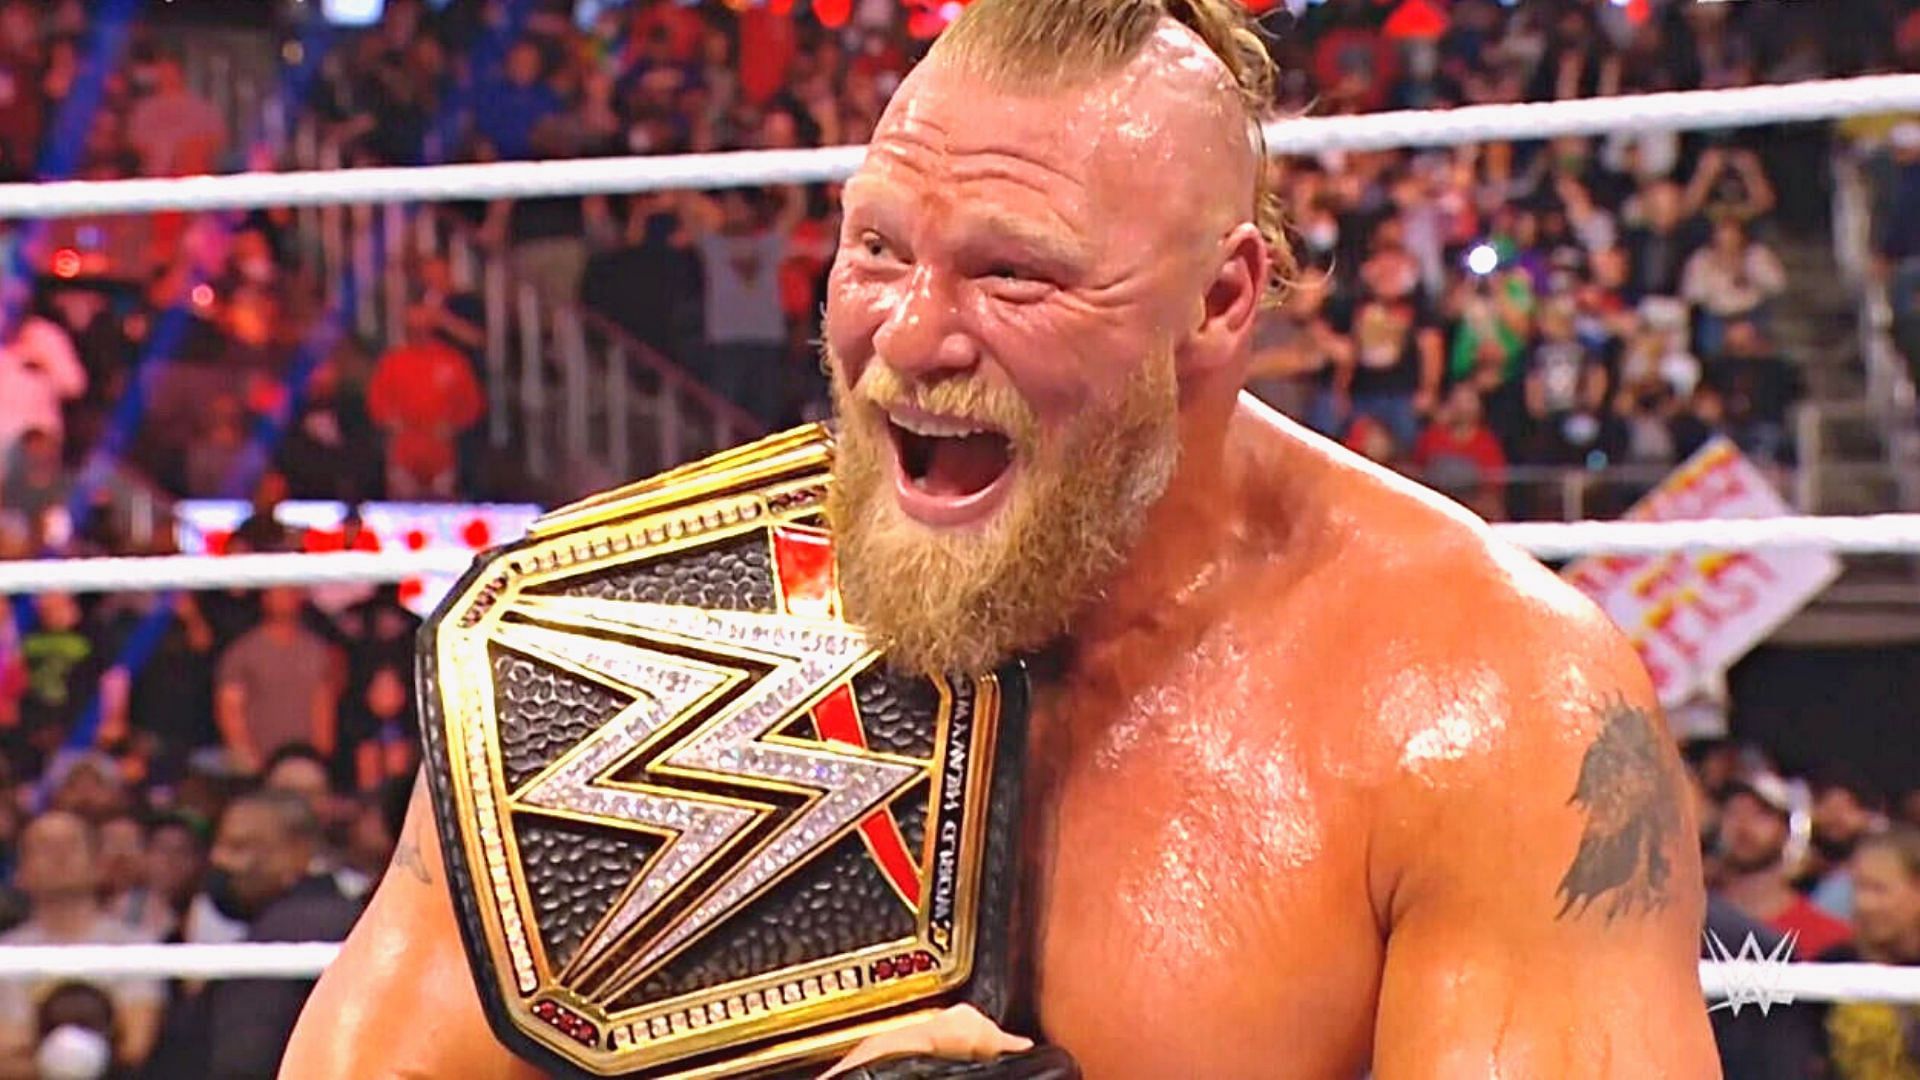 Brock Lesnar became a six-time WWE Champion at Day 1.